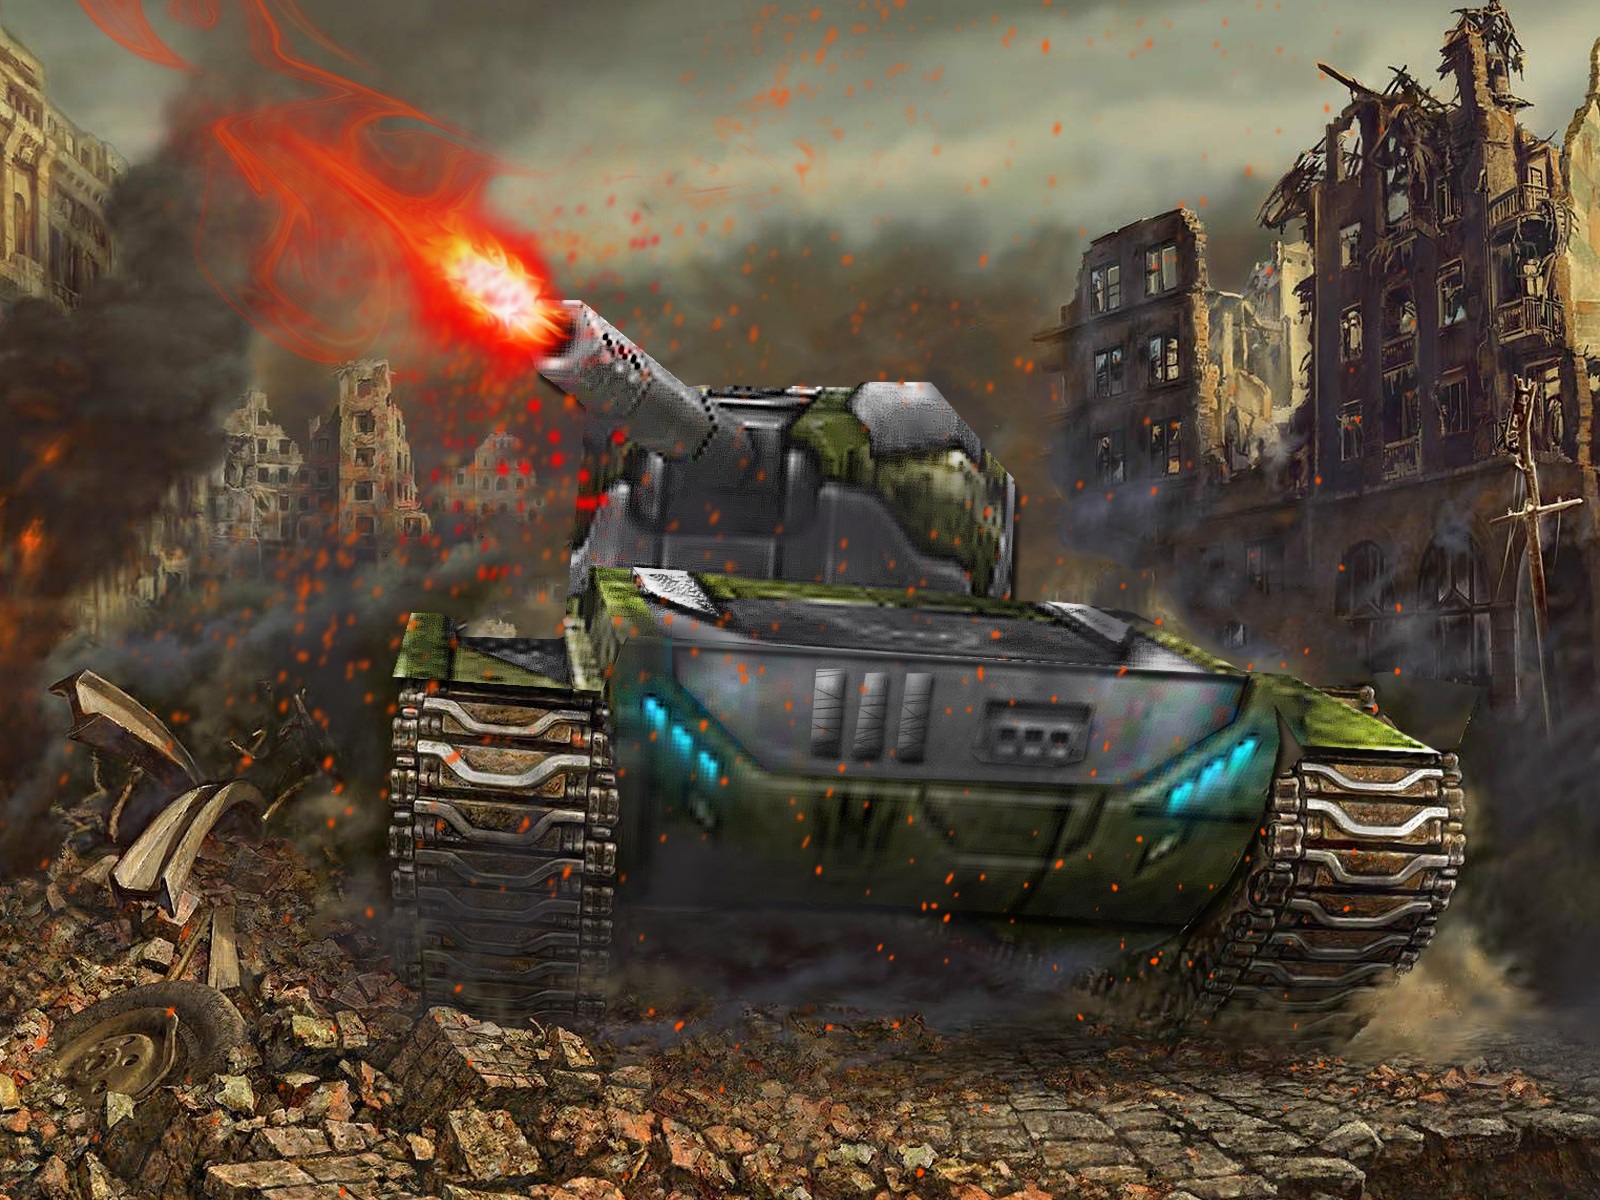 tanki wallpaper,tank,action adventure game,combat vehicle,strategy video game,pc game